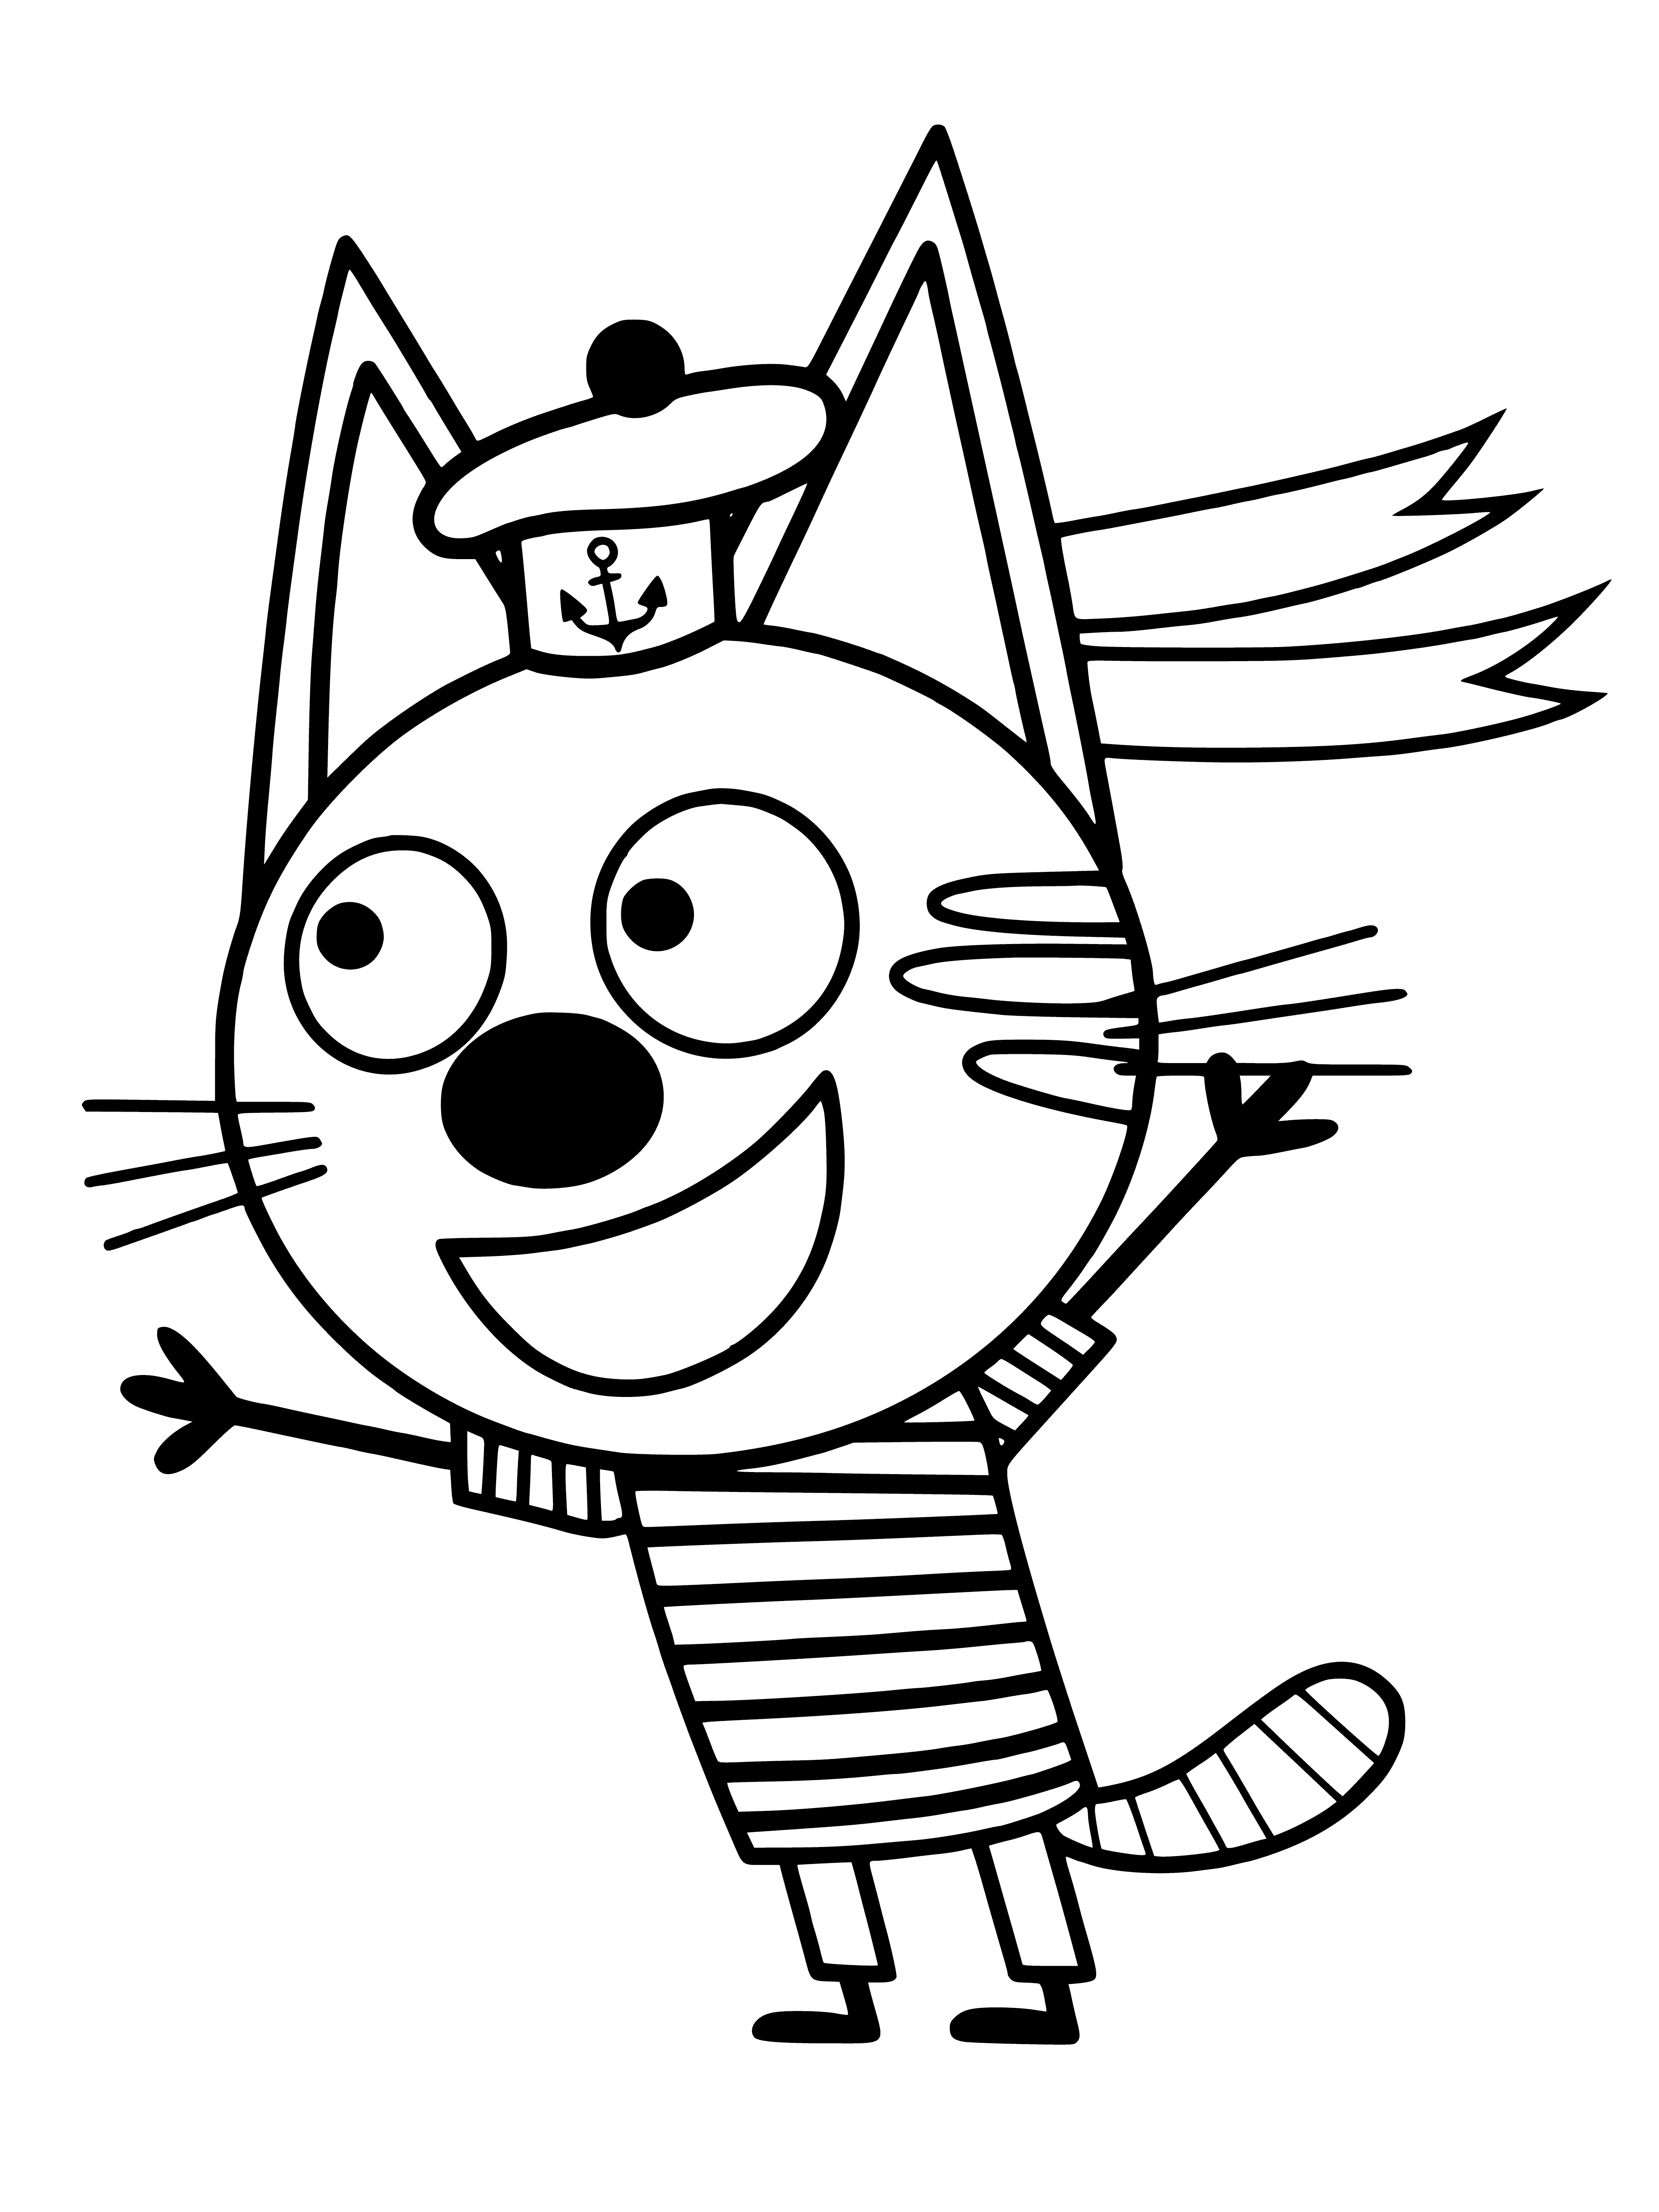 coloring page: Cat trio on tortilla covered in veggie stars, gray&white striped, black with green eyes and tabby pointing up its tail. #cats